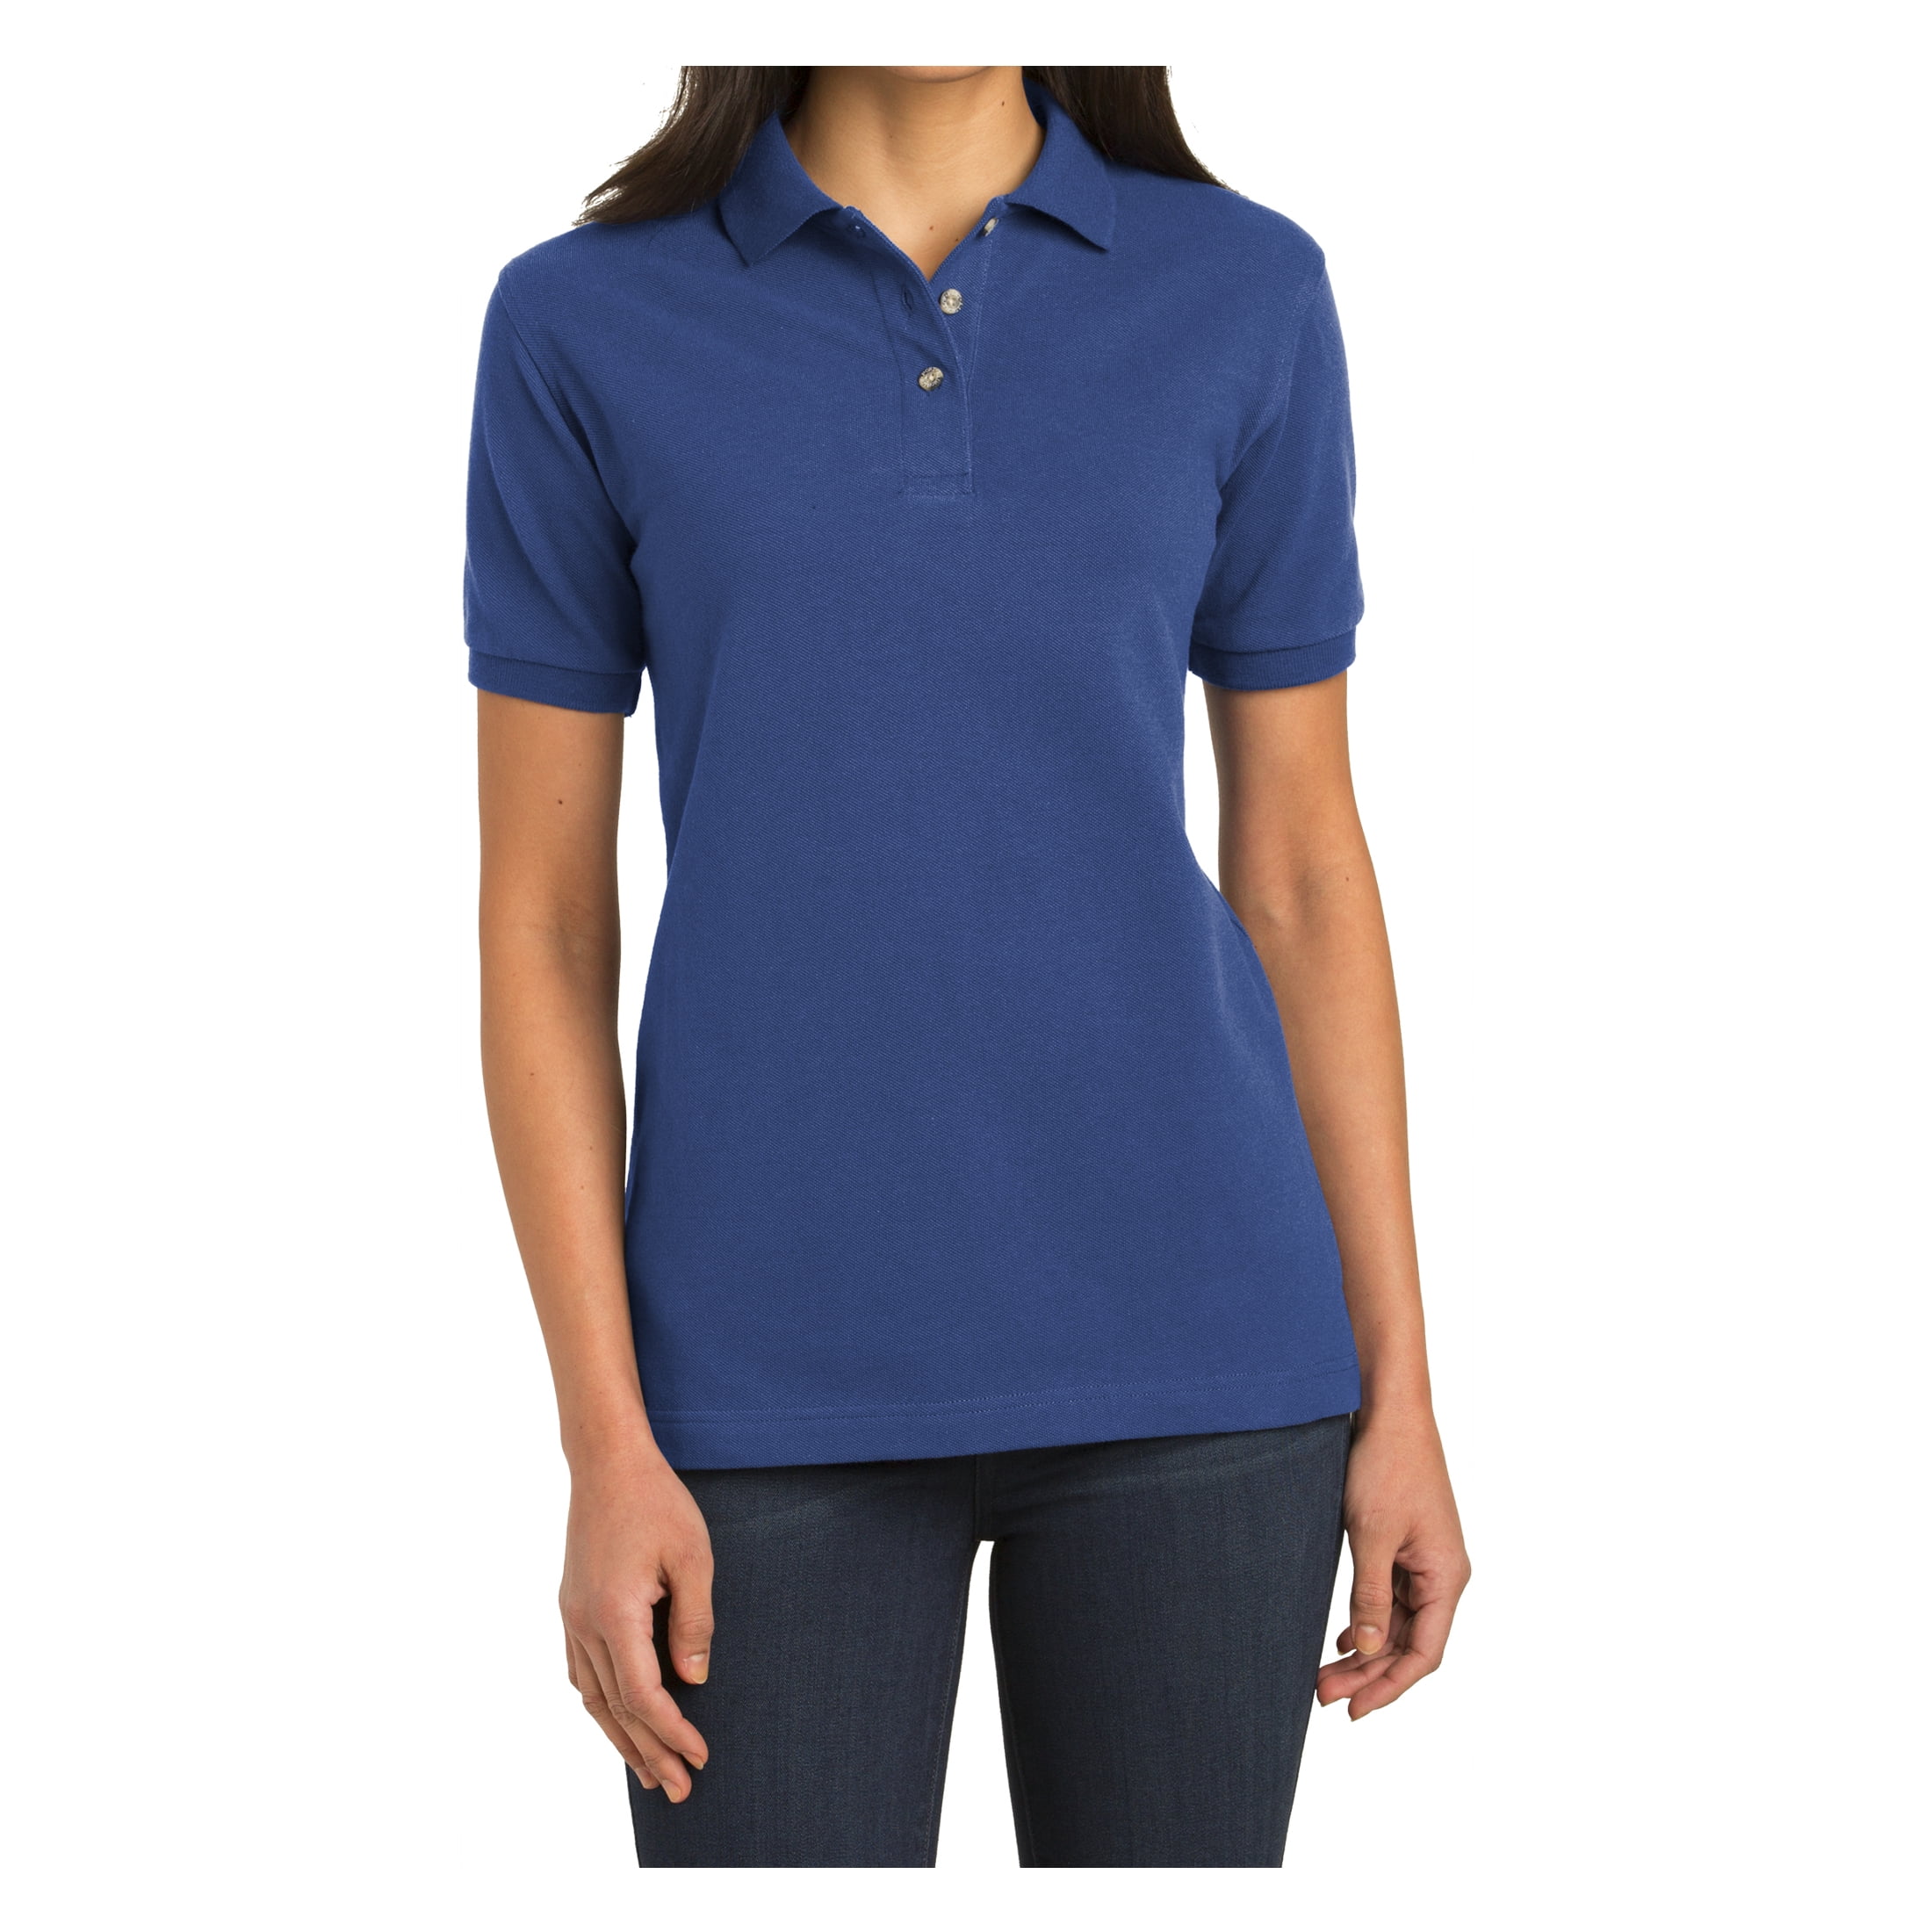 RUSSELL LADIES STRETCH POLO SHIRT LONG SLIM FIT COTTON LYCRA SMART CASUAL XS-2XL 